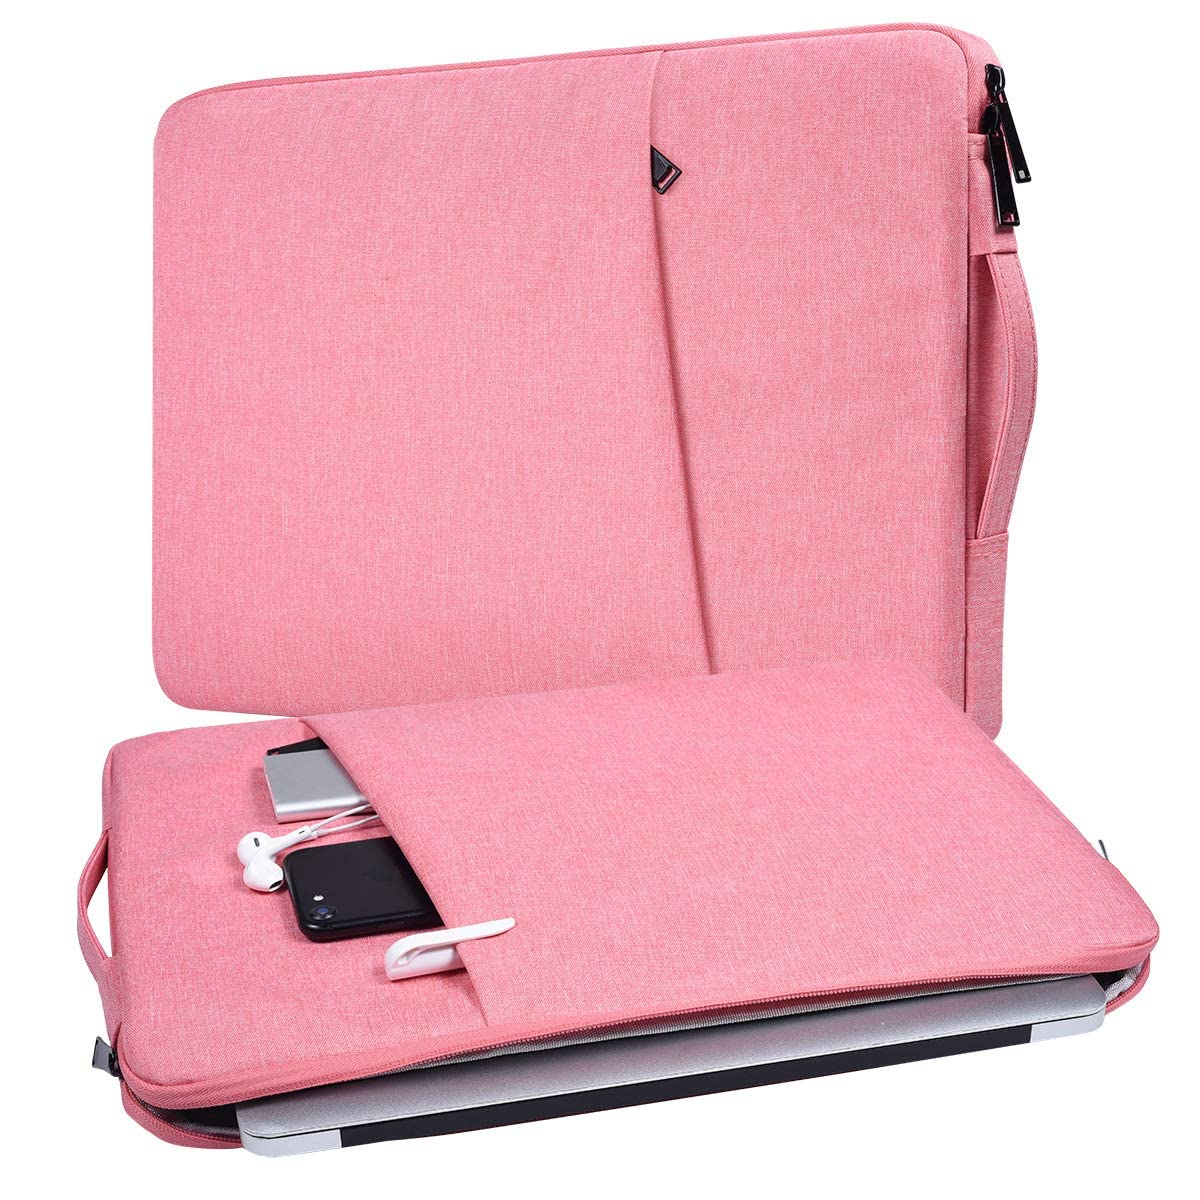 Airbag Universal 2-in-1 sleeve / bag for laptops up to 14 inches -  Geeektech.com